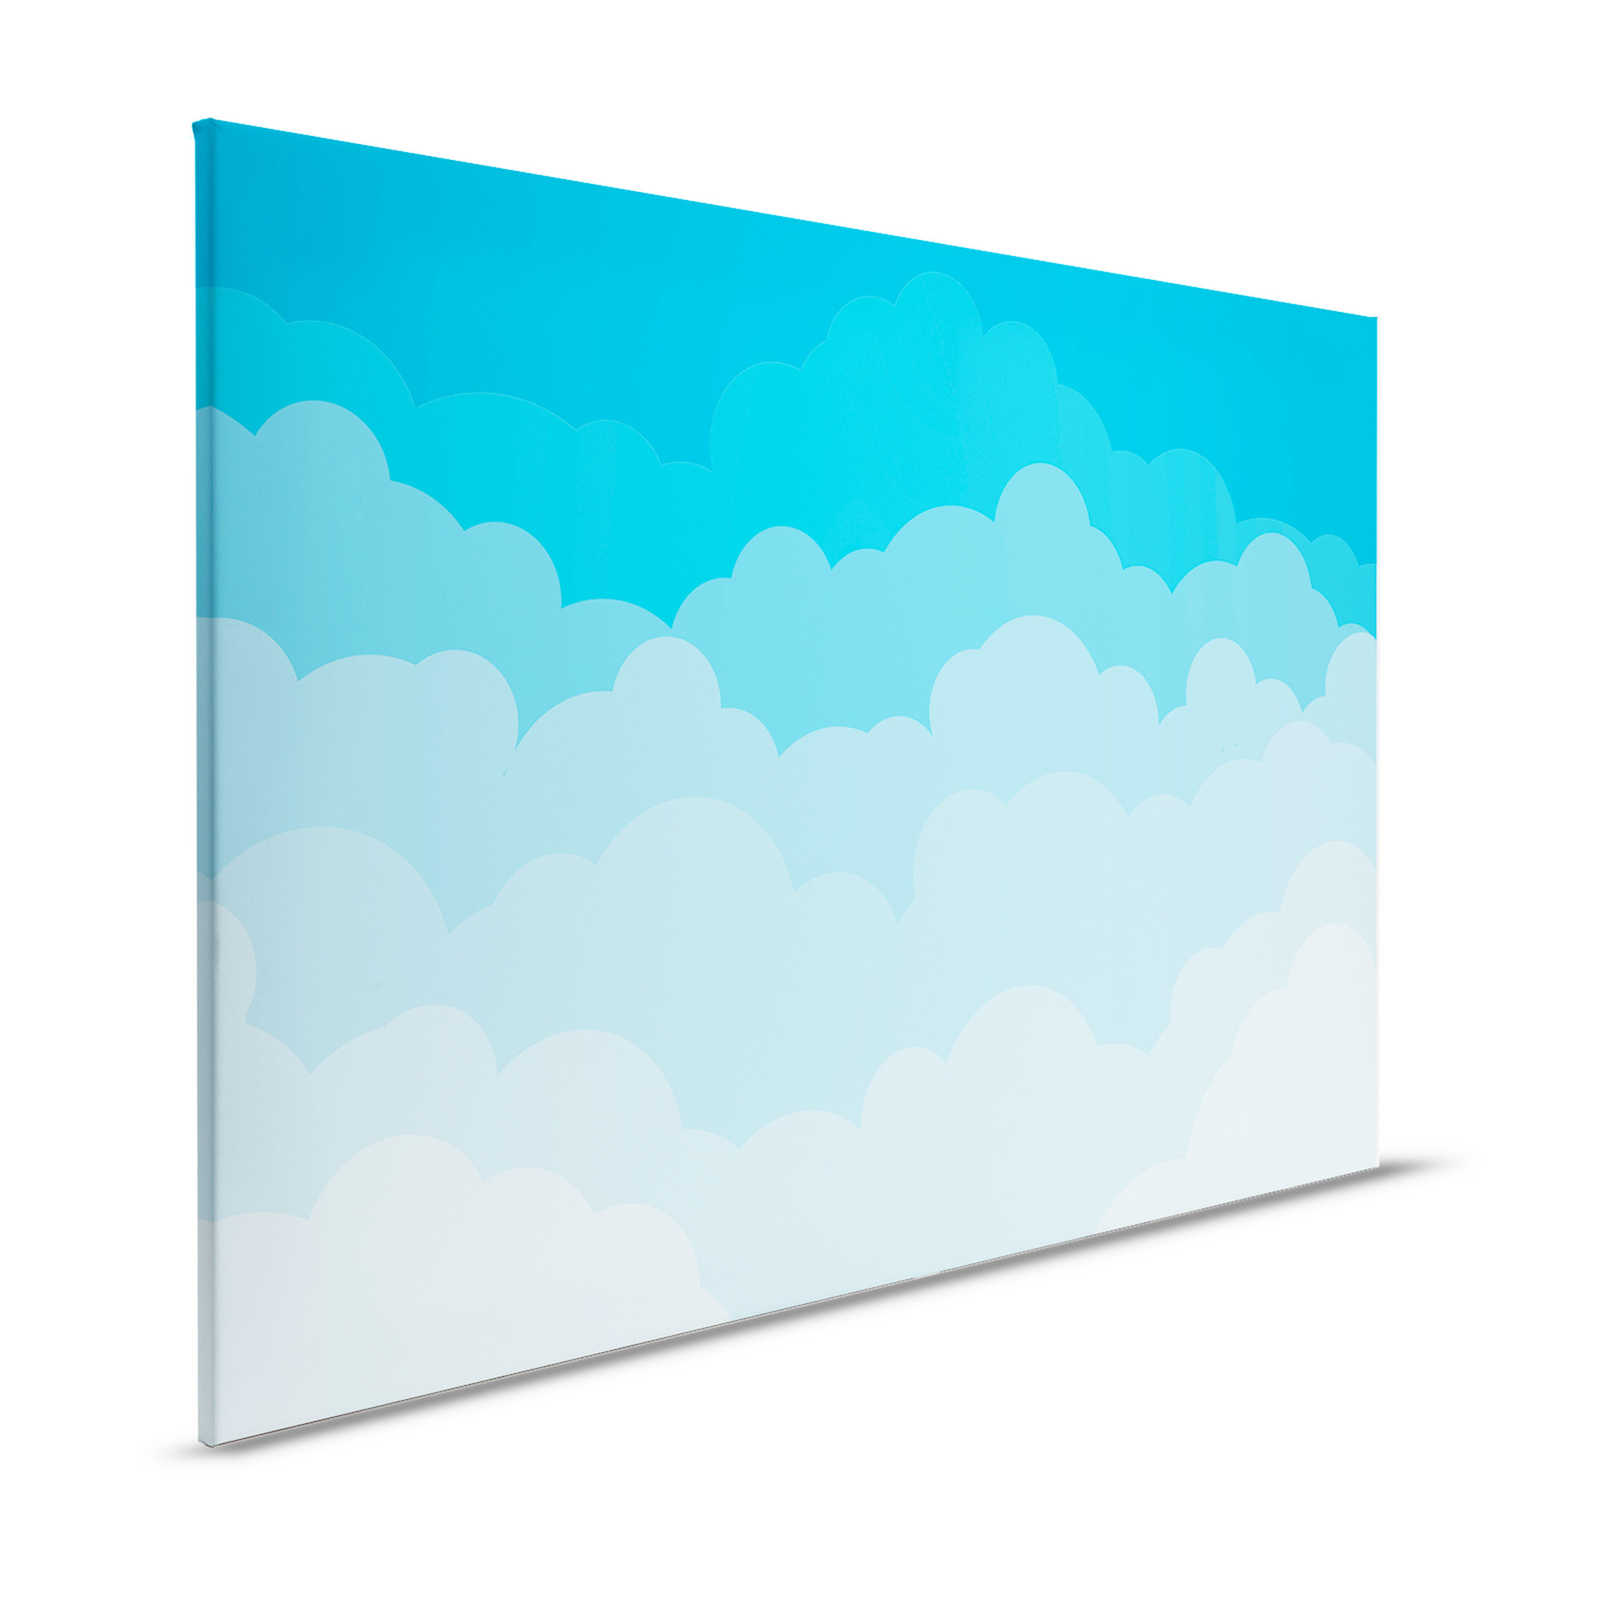 Canvas Sky with Clouds in Comic Style - 120 cm x 80 cm
